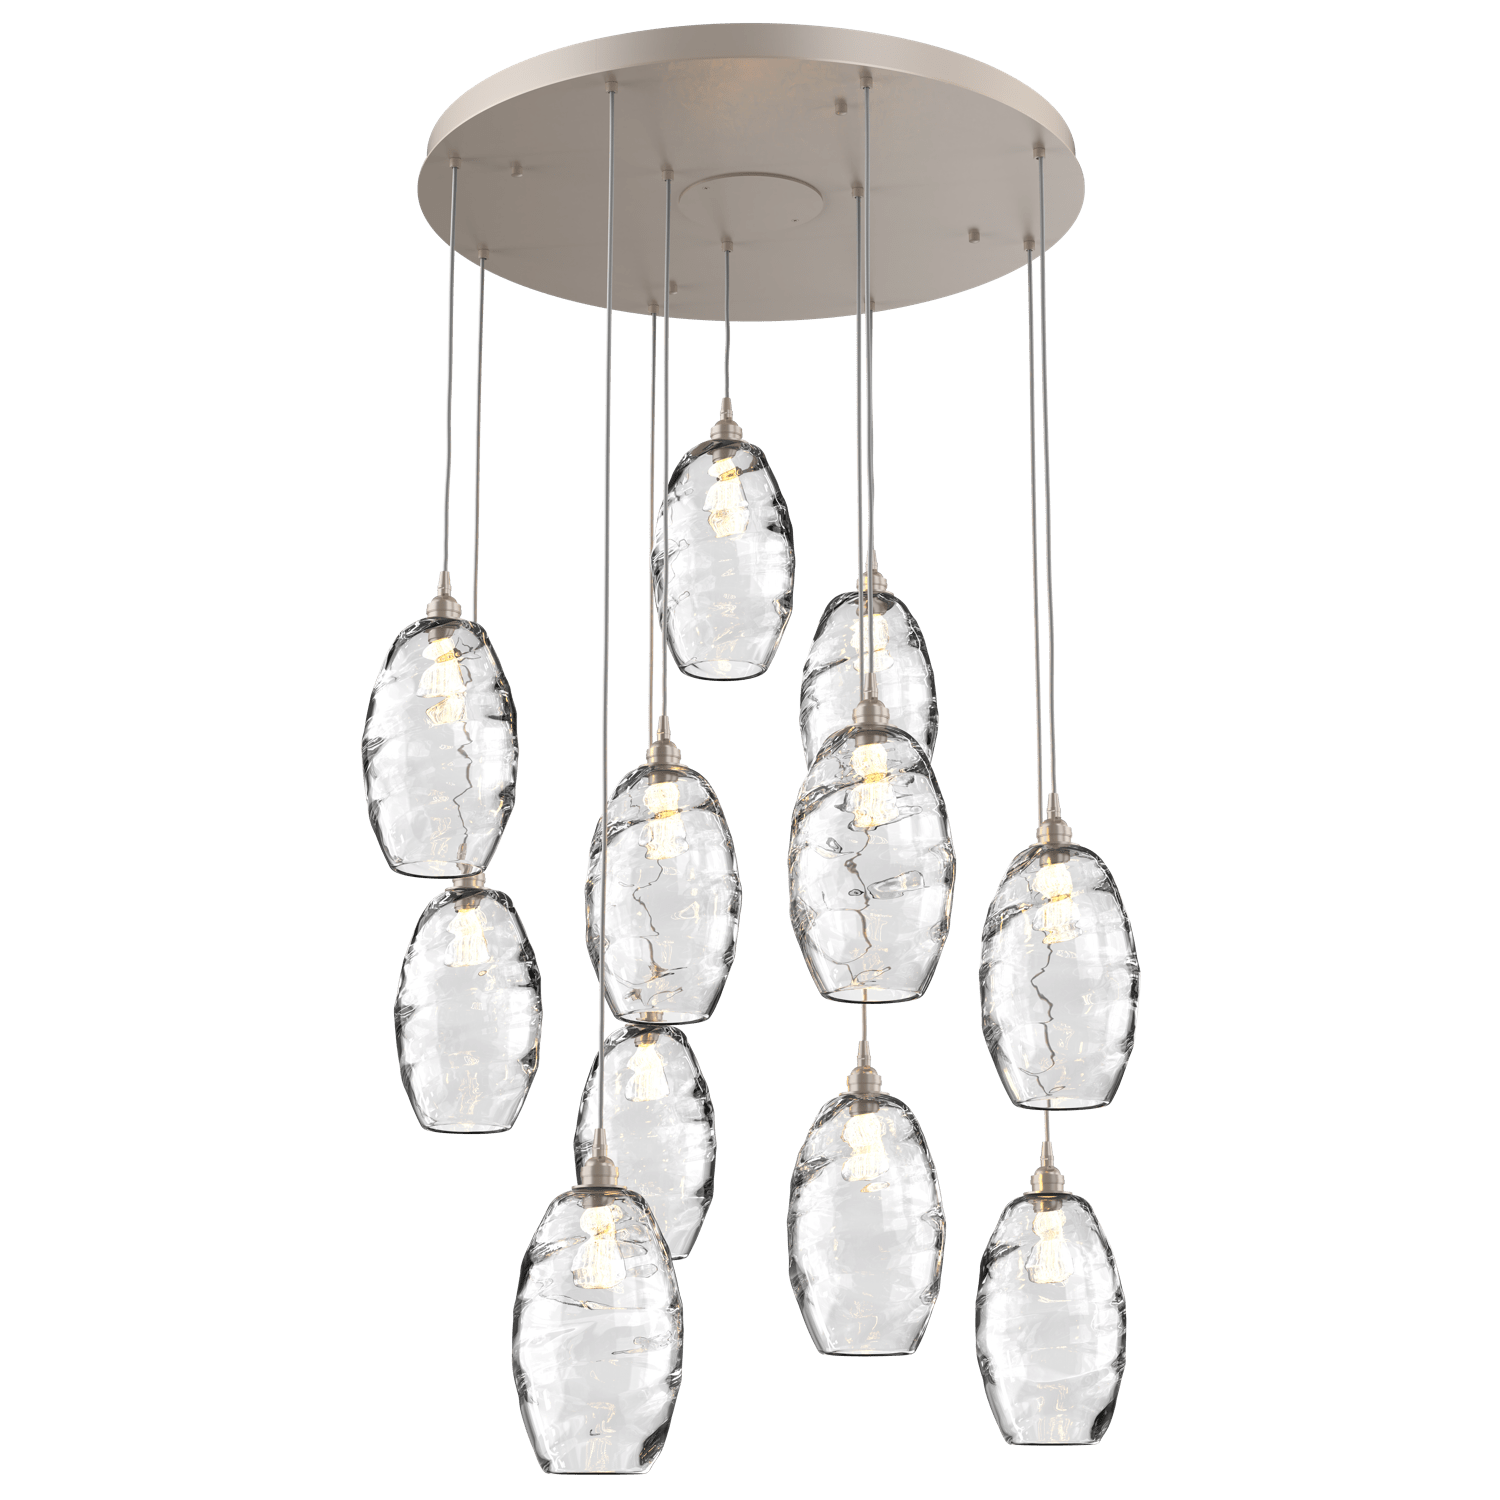 CHB0035-11-BS-OC-Hammerton-Studio-Optic-Blown-Glass-Elisse-11-light-round-pendant-chandelier-with-metallic-beige-silver-finish-and-optic-clear-blown-glass-shades-and-incandescent-lamping